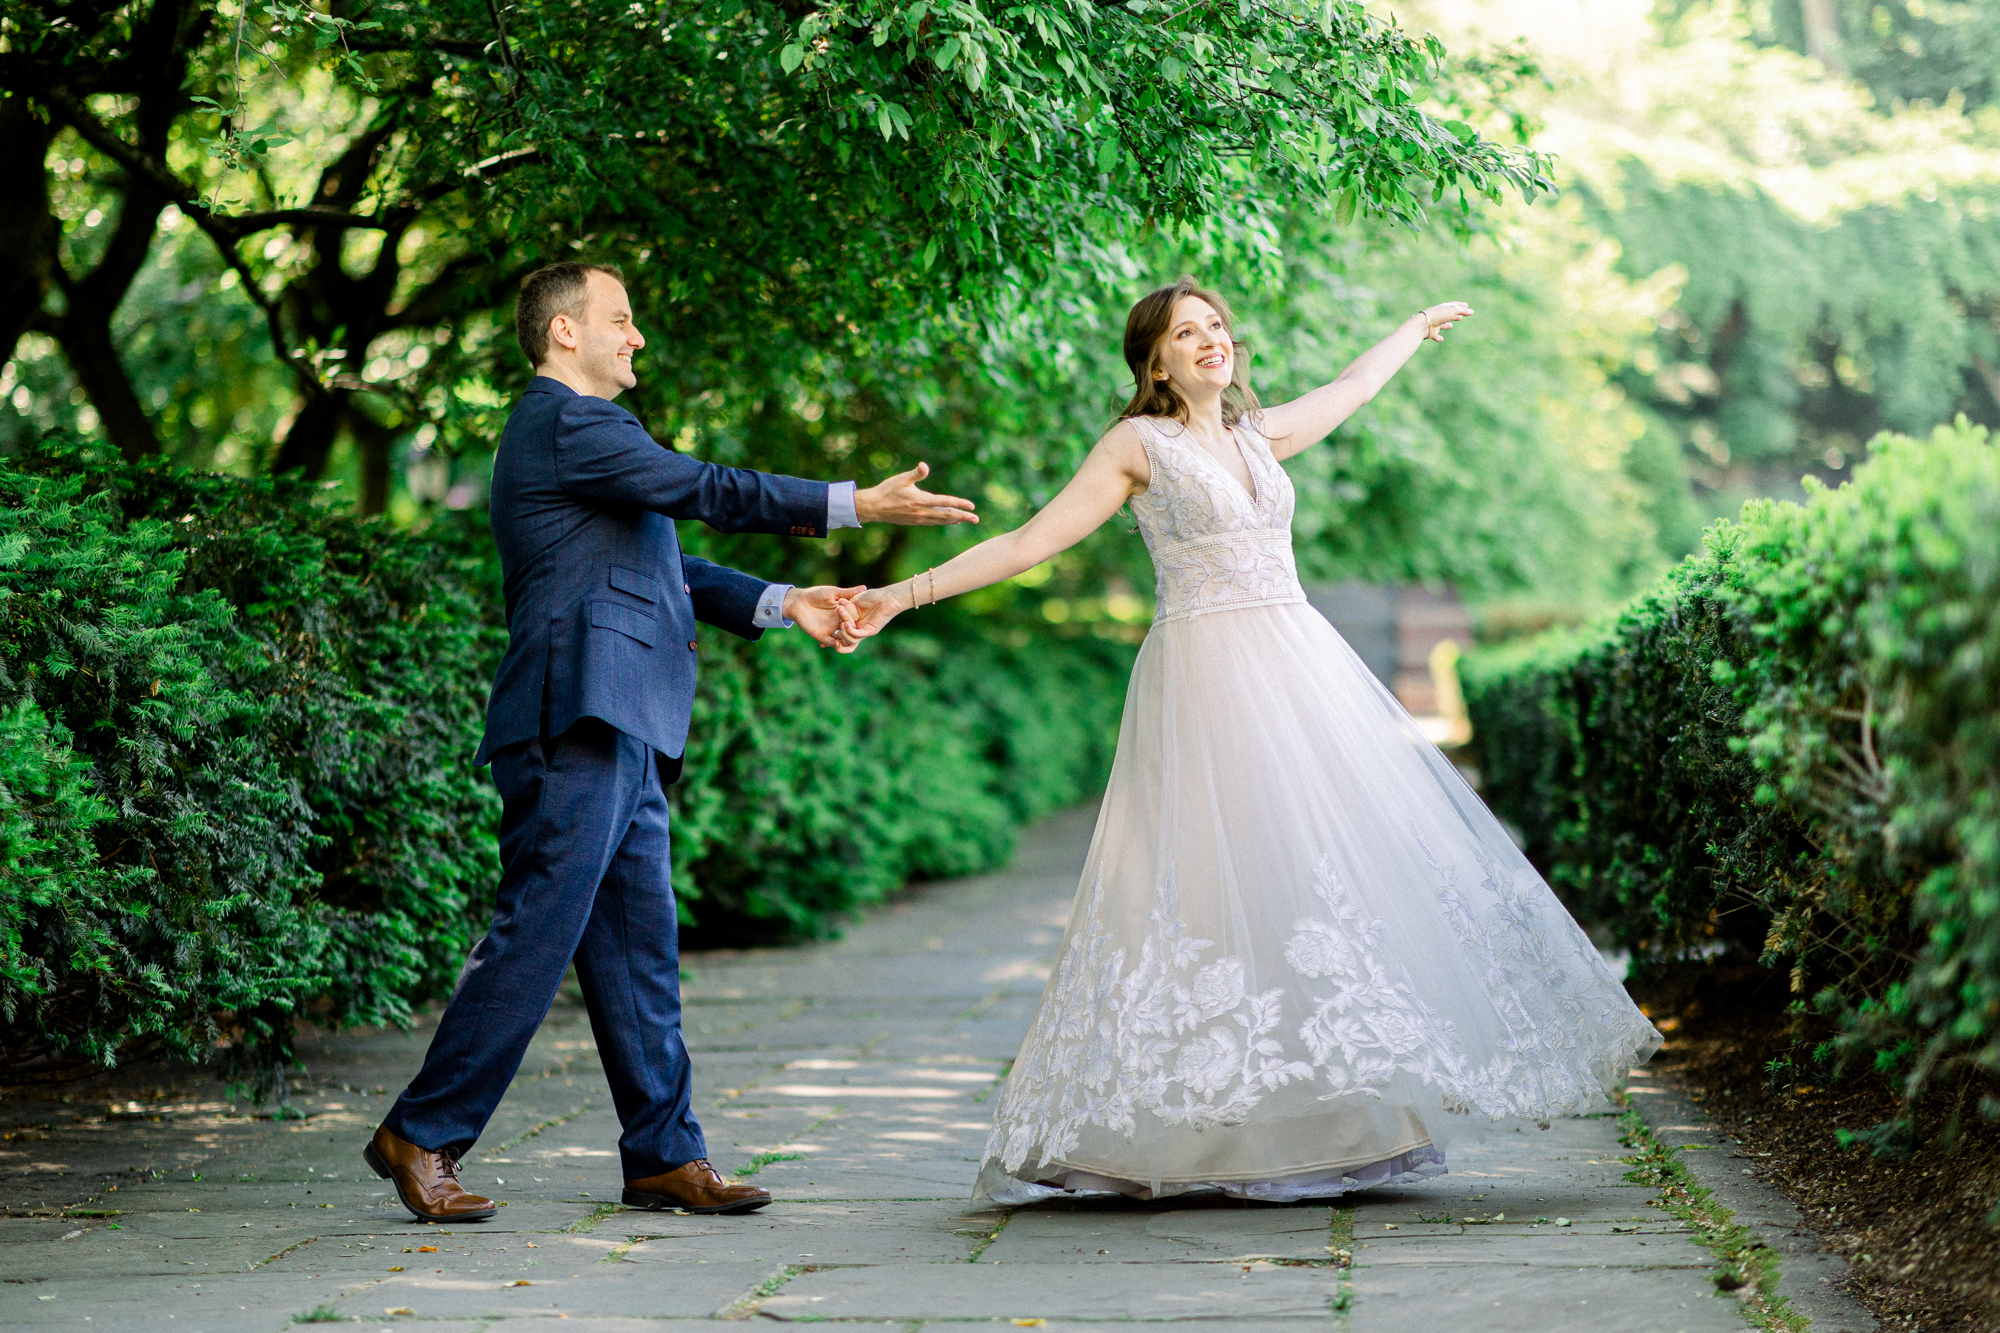 Romantic Summer Wedding Photos at the Conservatory Garden in Central Park New York